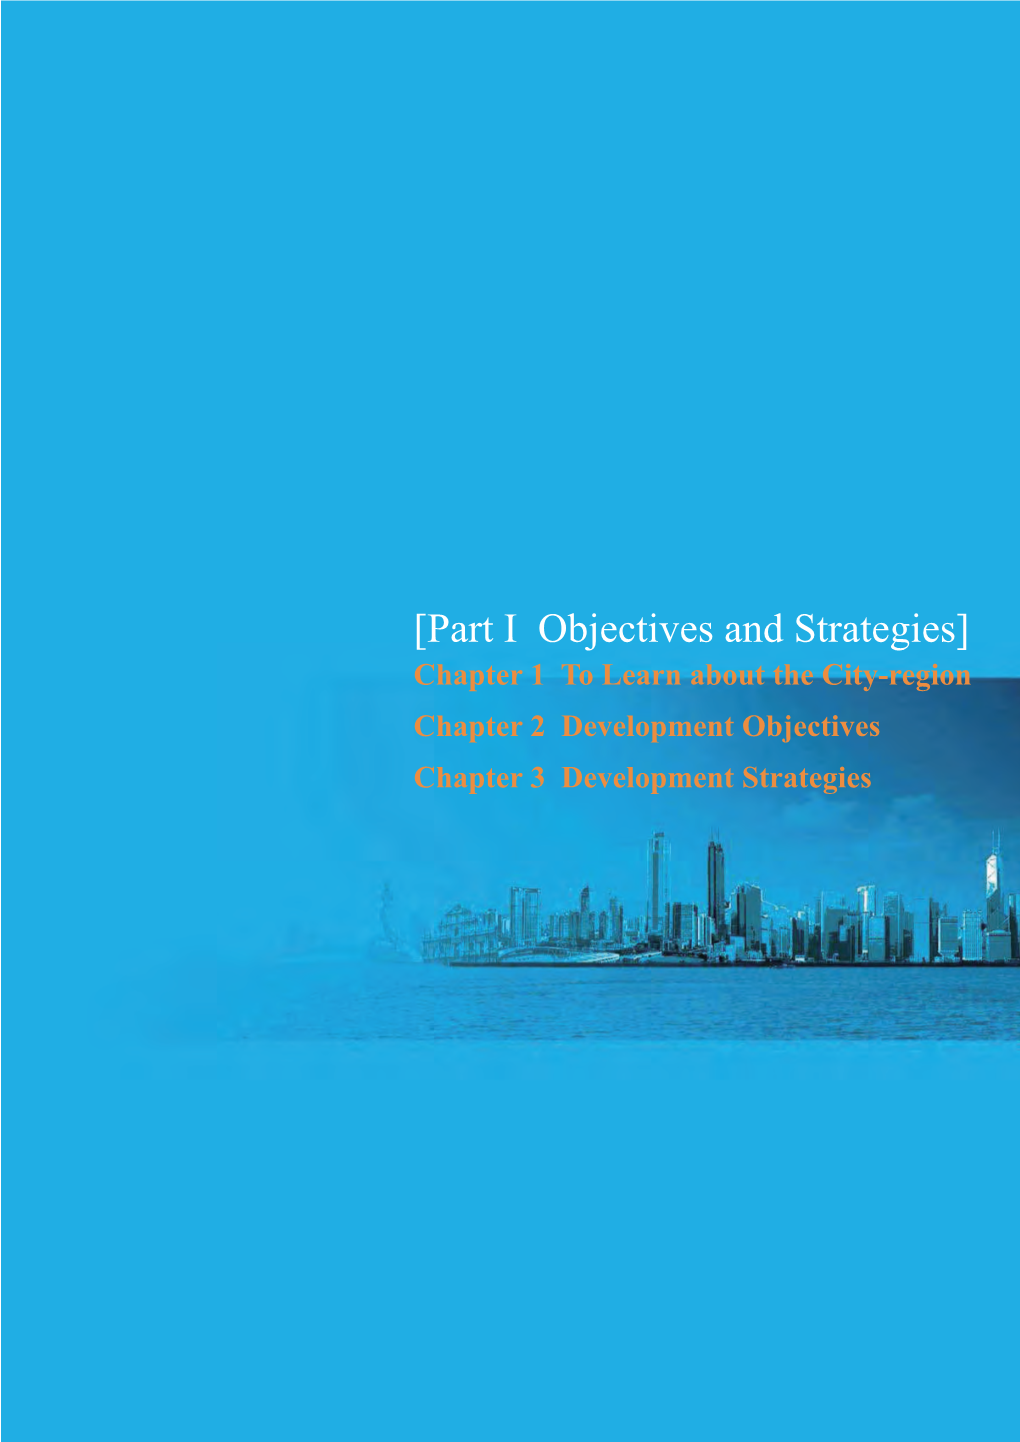 [Part I Objectives and Strategies]